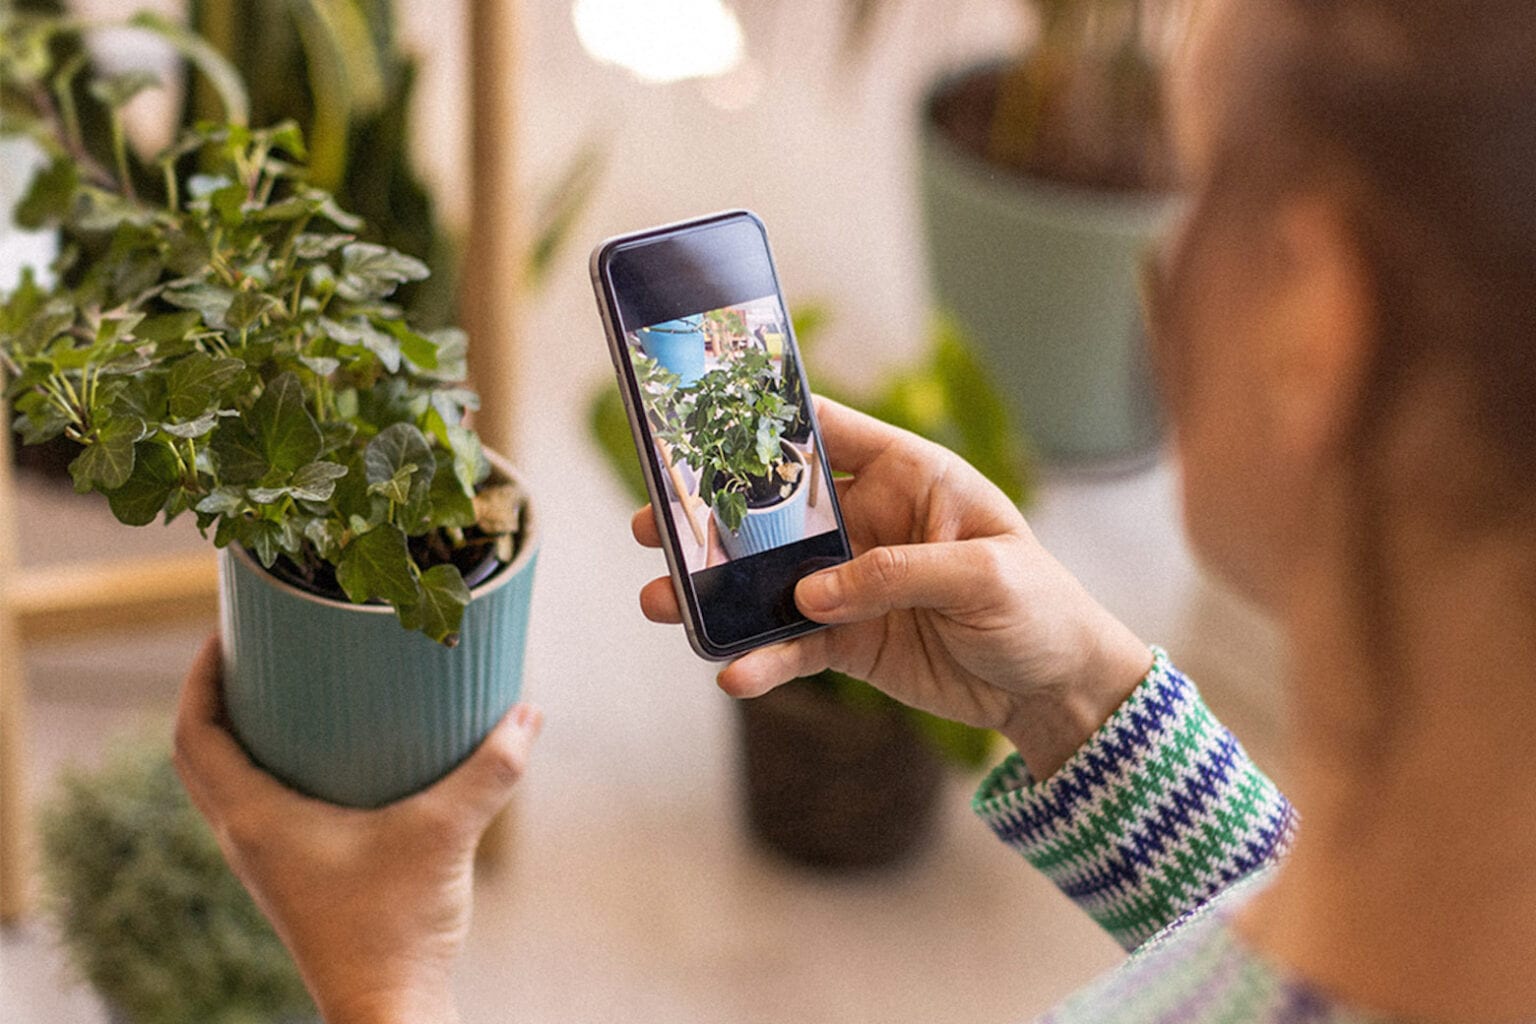 Use your iPhone to learn about the plants around you with NatureID.